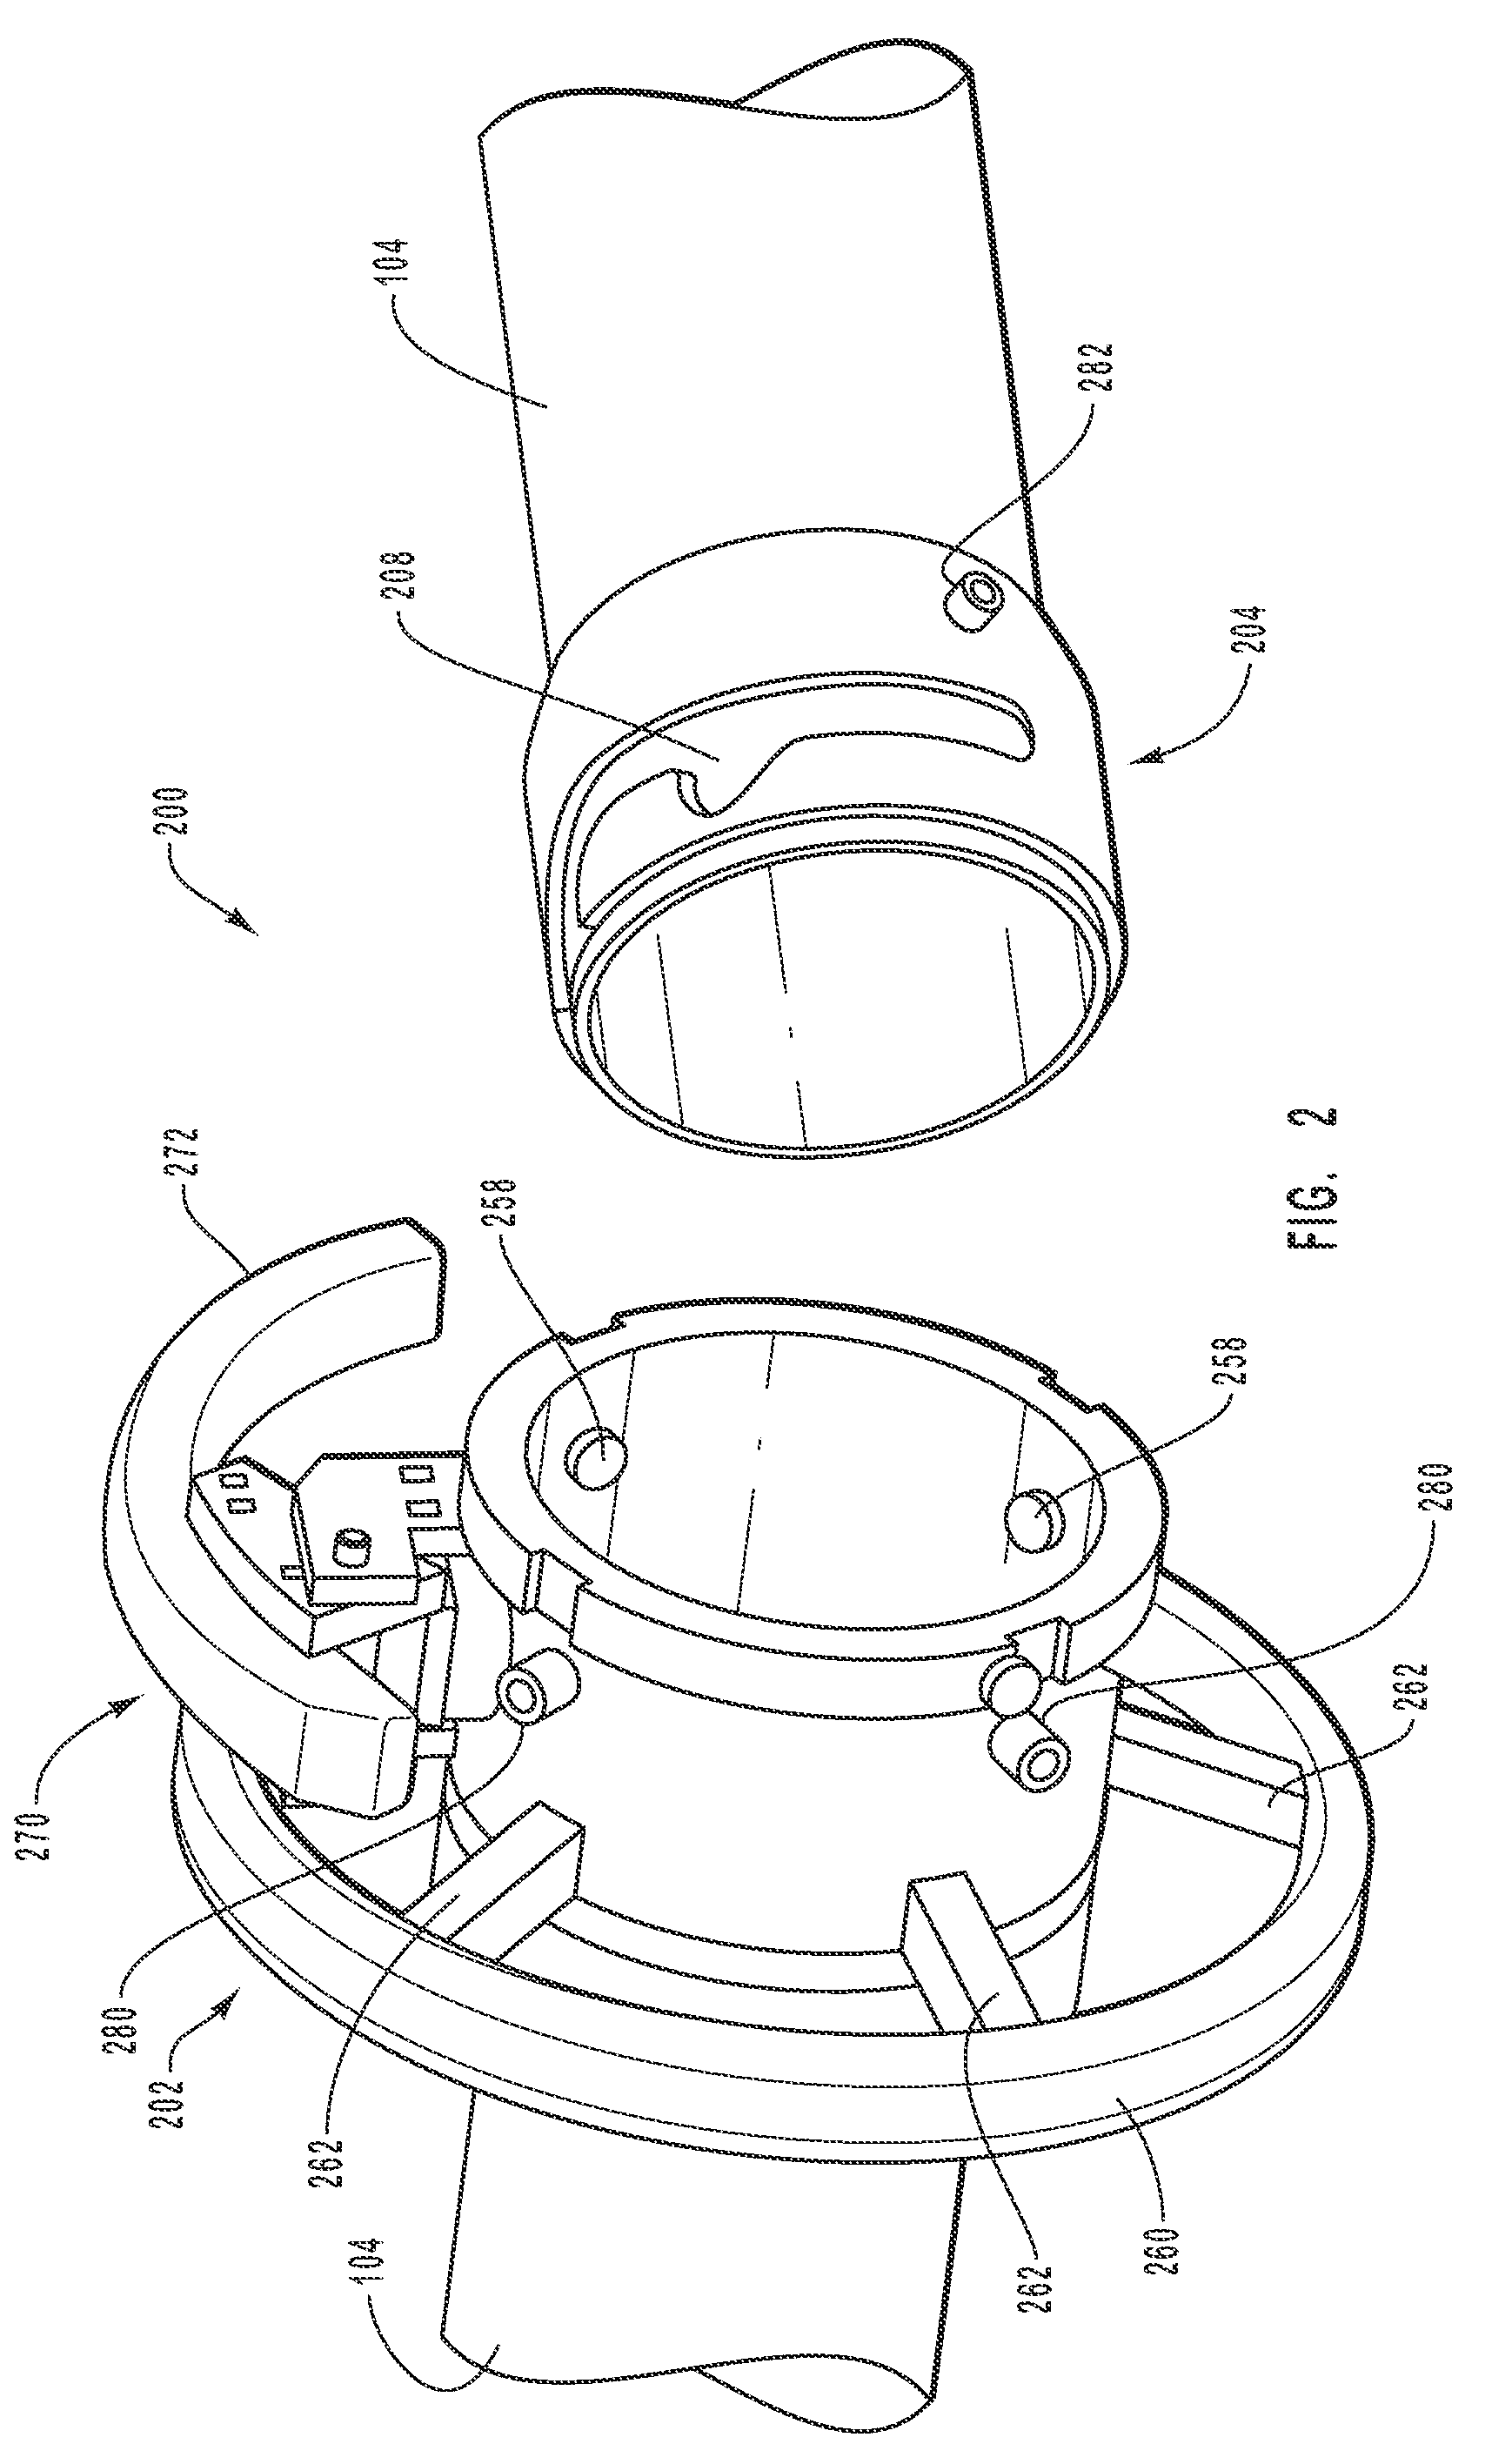 Fluid system coupling with pivoting handle actuating member